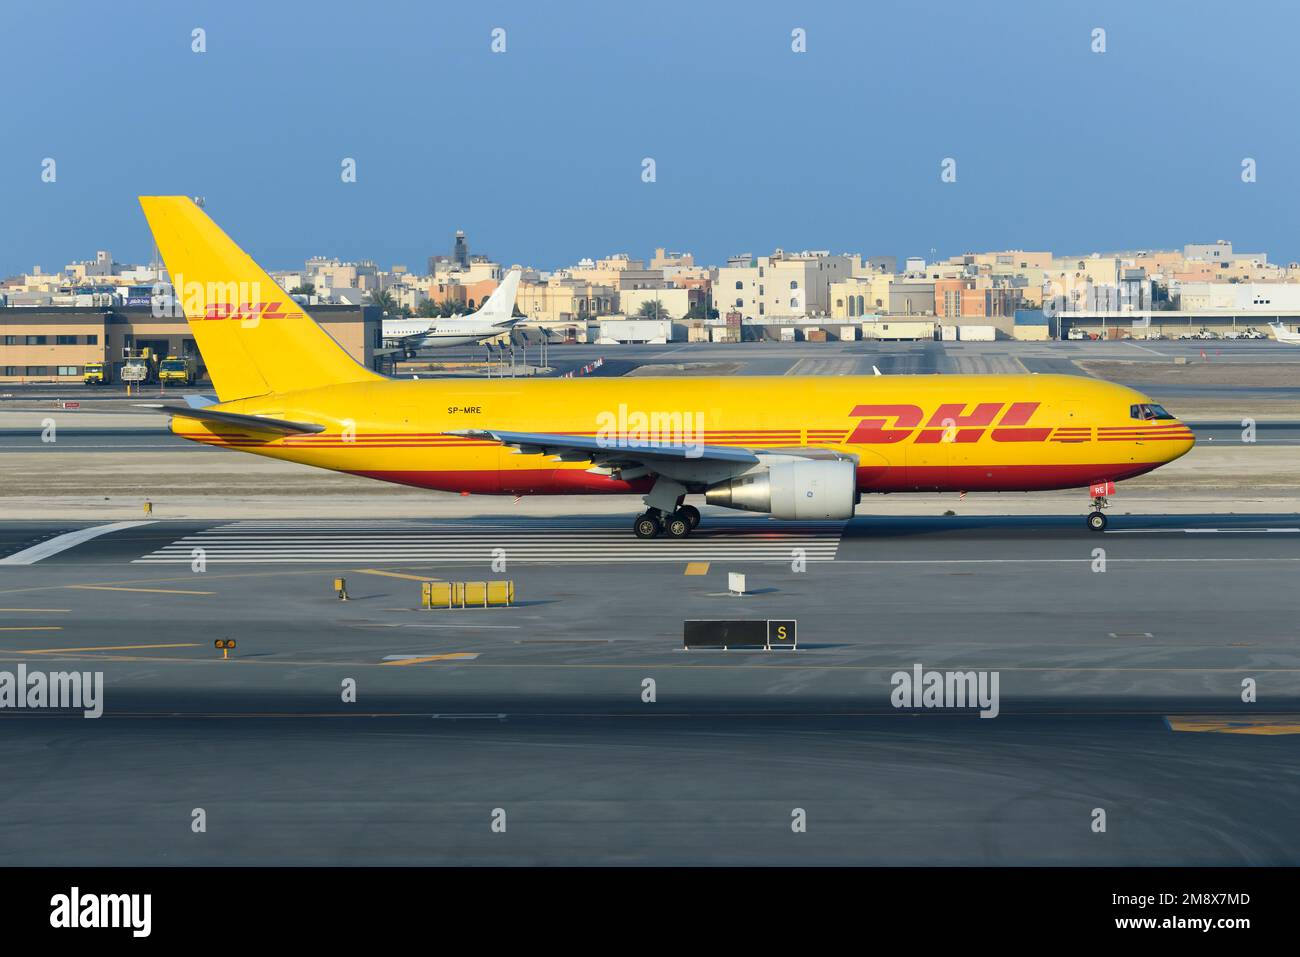 DHL Cargo airplane Boeing 767 taxiing. Transport of freighter on DHL Aircraft 767F, also refered as Boeing 767-200BDSF plane. Stock Photo